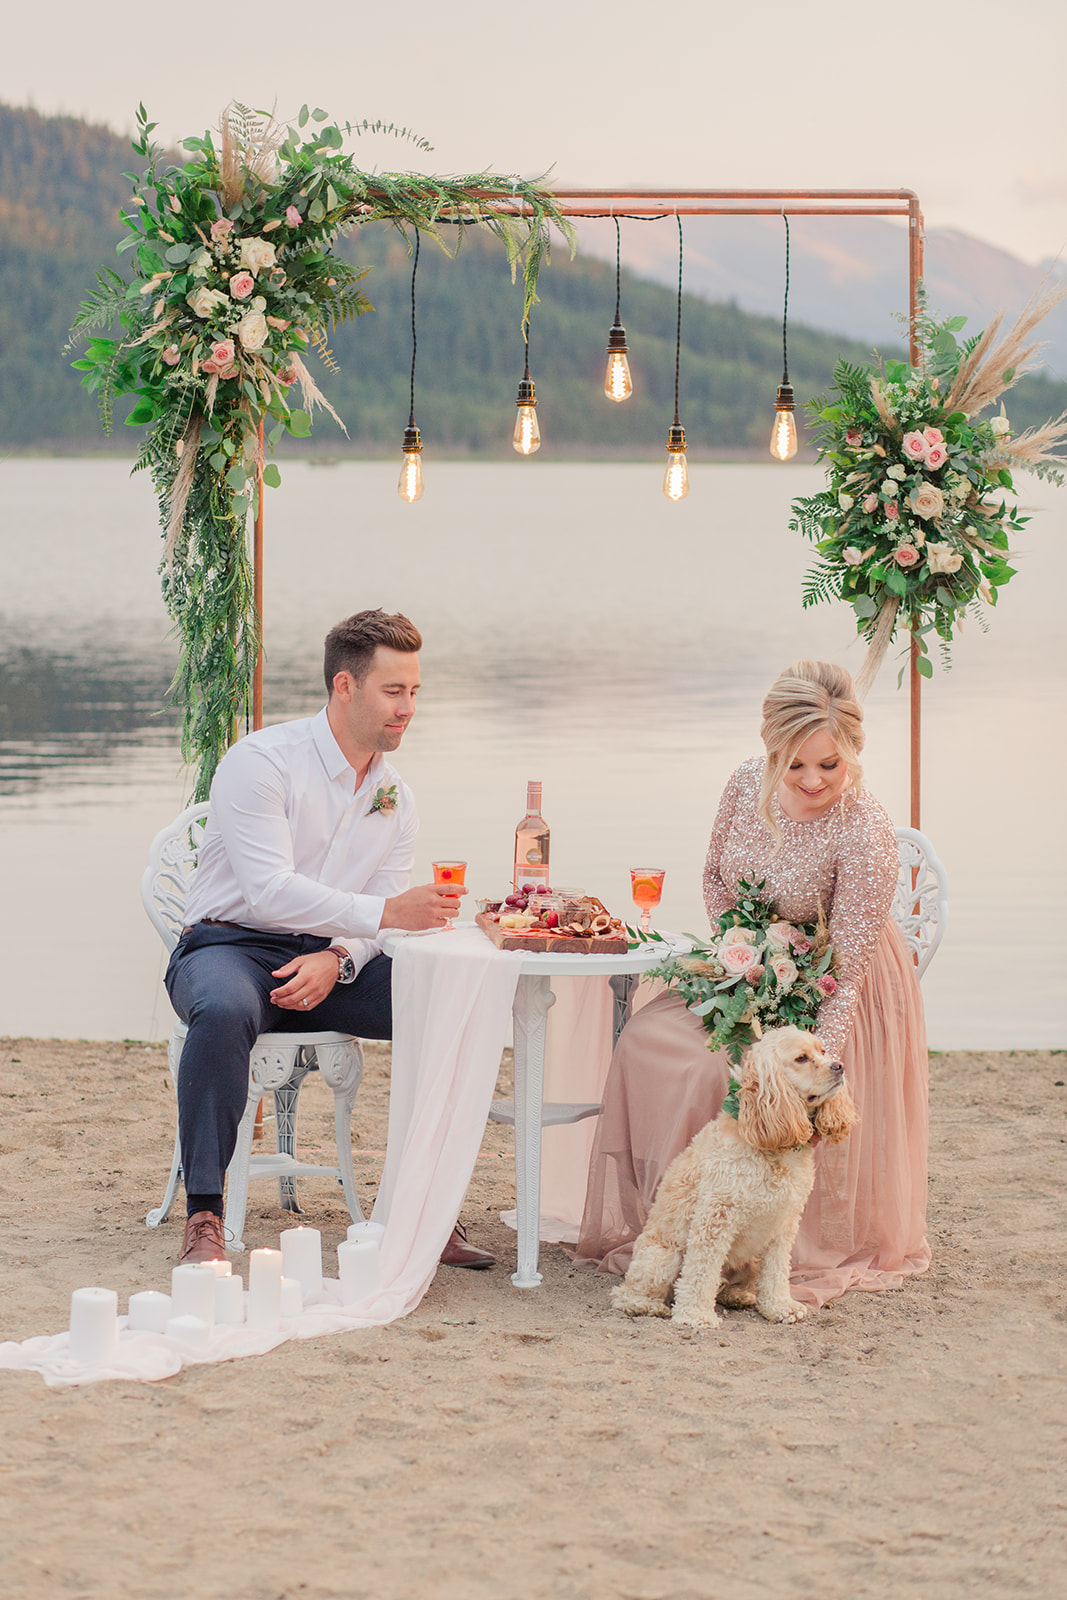 Bride and groom with their intimate and romantic decor for their lakeside elopement